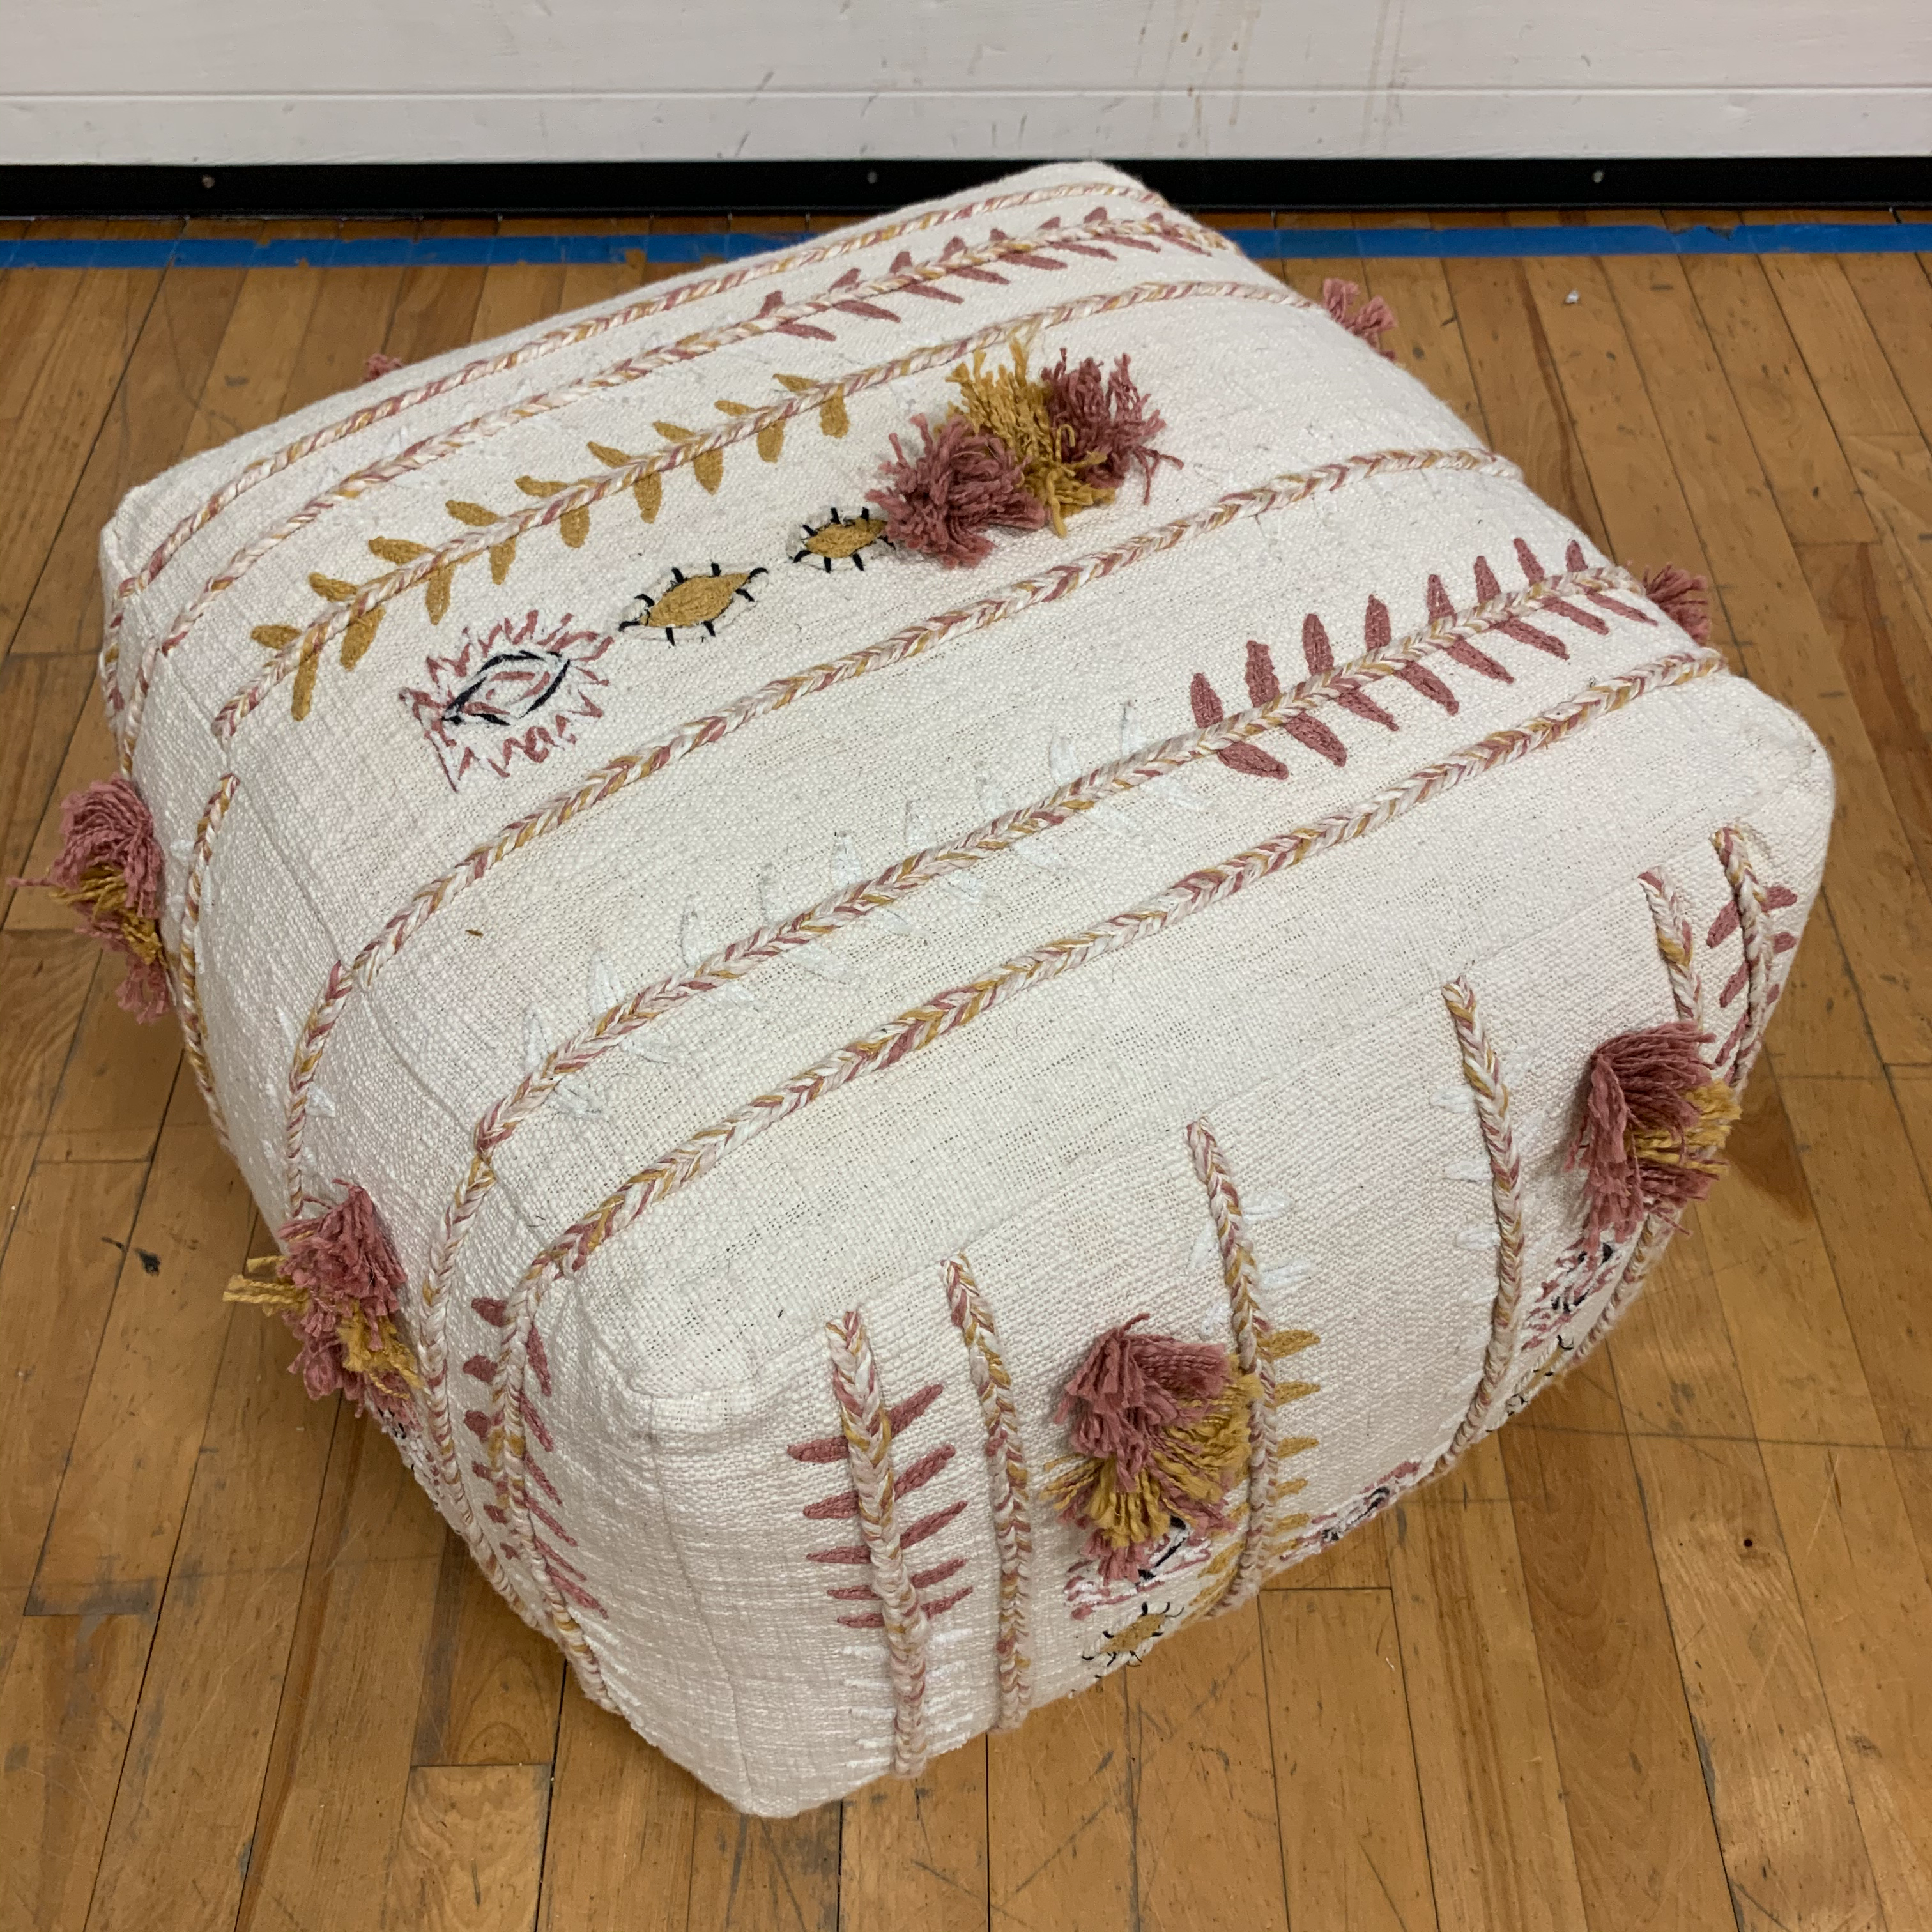 Embroidered Pouf